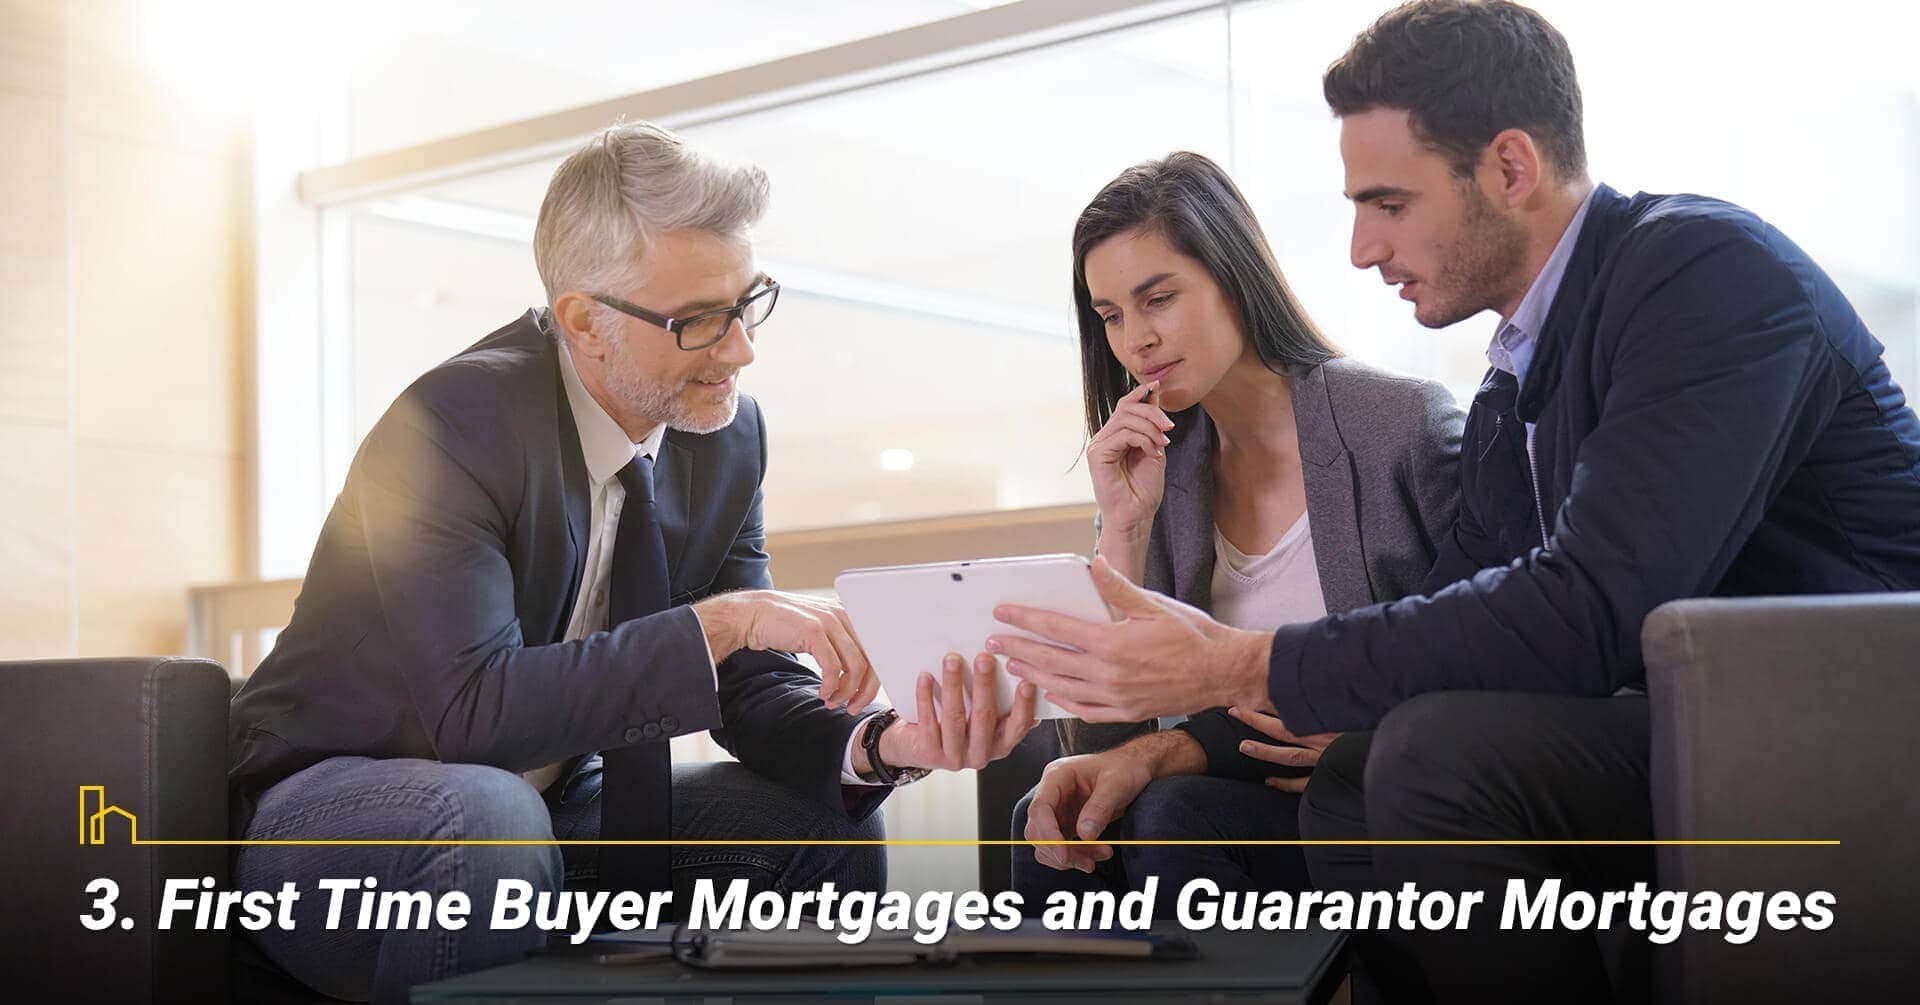 First Time Buyer Mortgages and Guarantor Mortgages, loan for first time home buyers